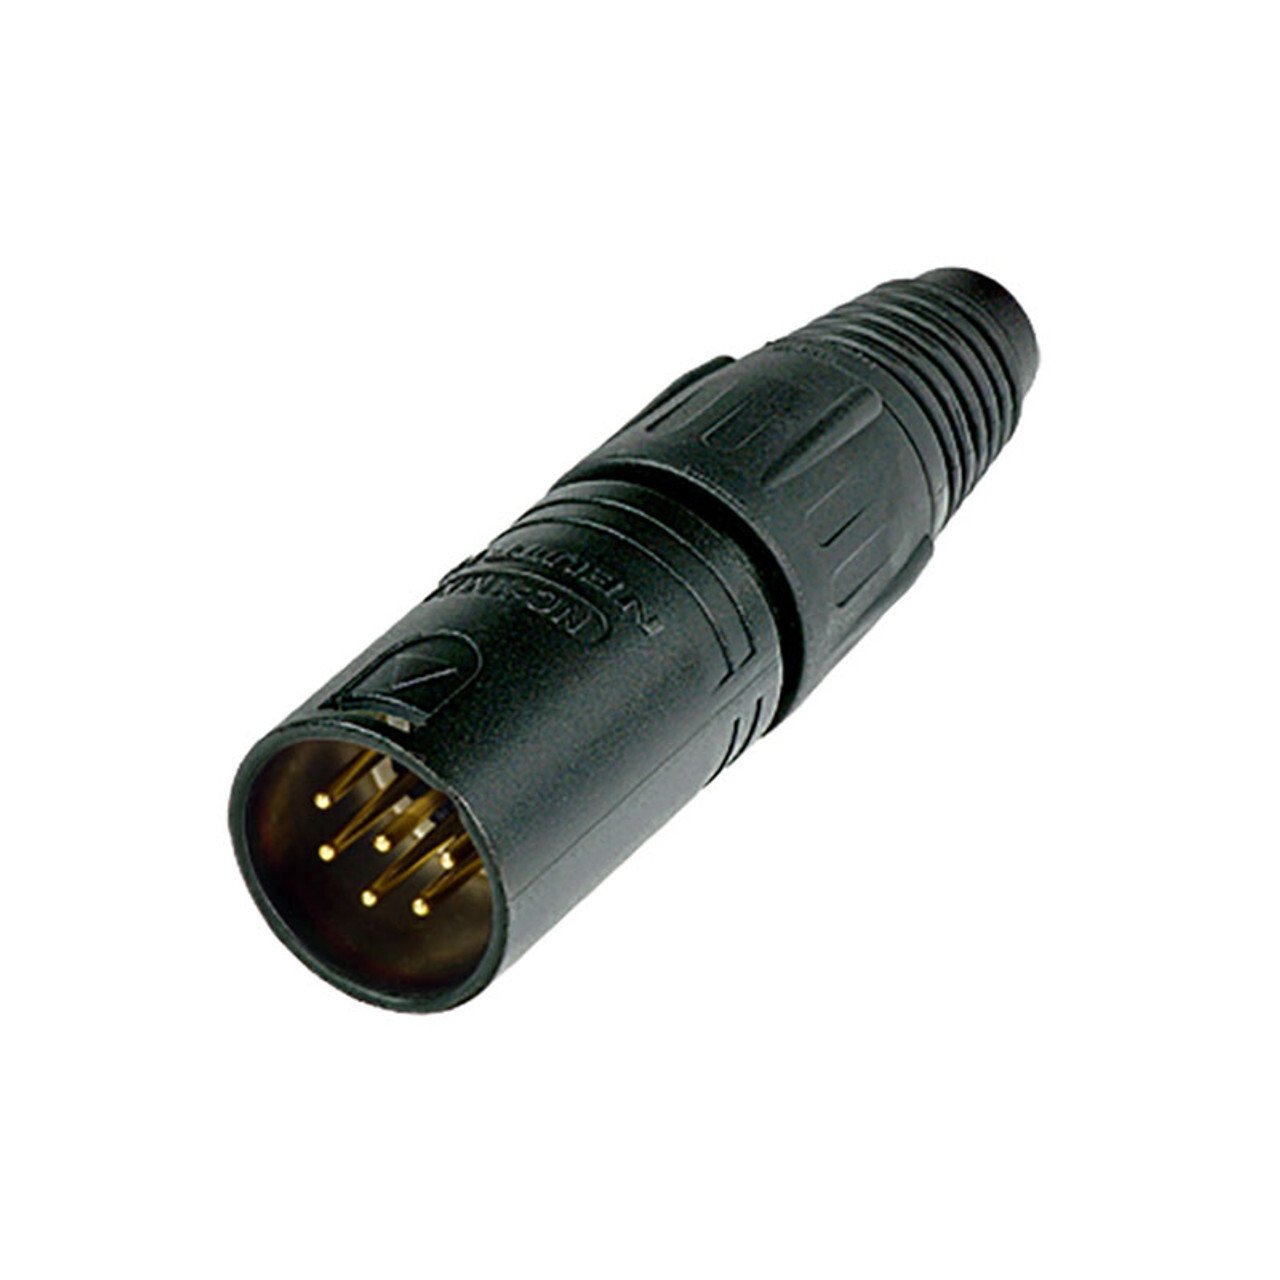 NC6MSXX-B<br />6 pole male cable connector with BLACK  housing and golden  contacts. Equivalent to Switchcraft pin layout.